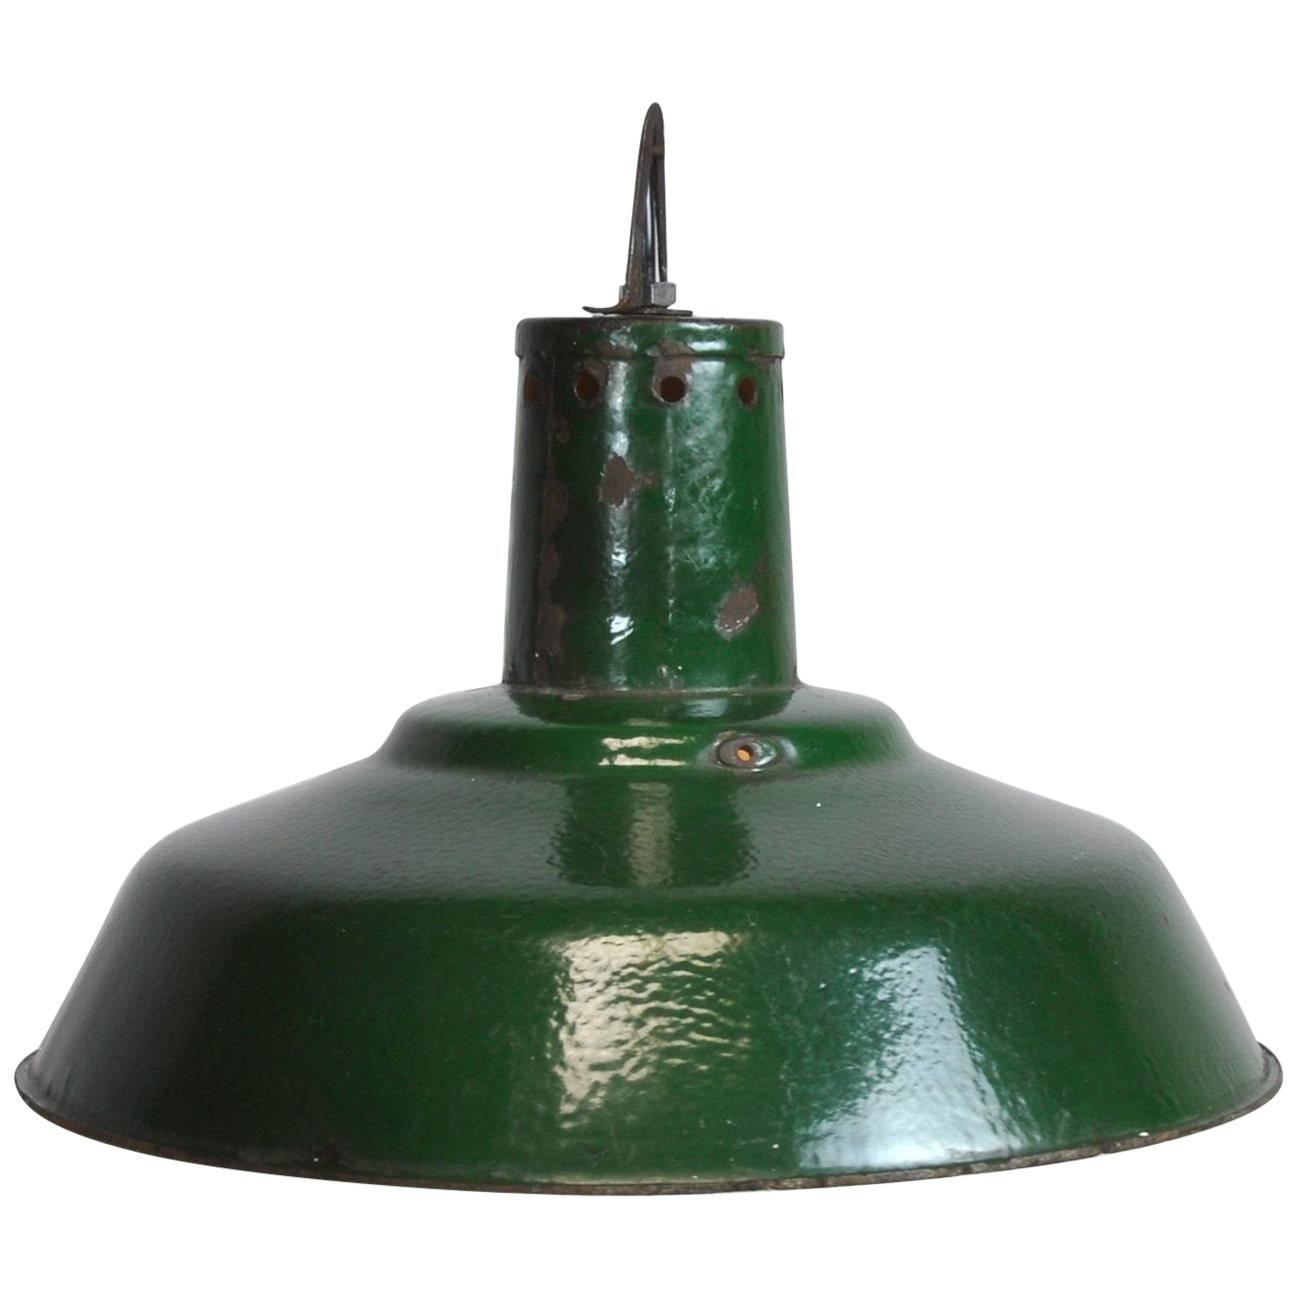 Original Industrial Lamp from Hungary, Factory Pendant Light in Green Finish